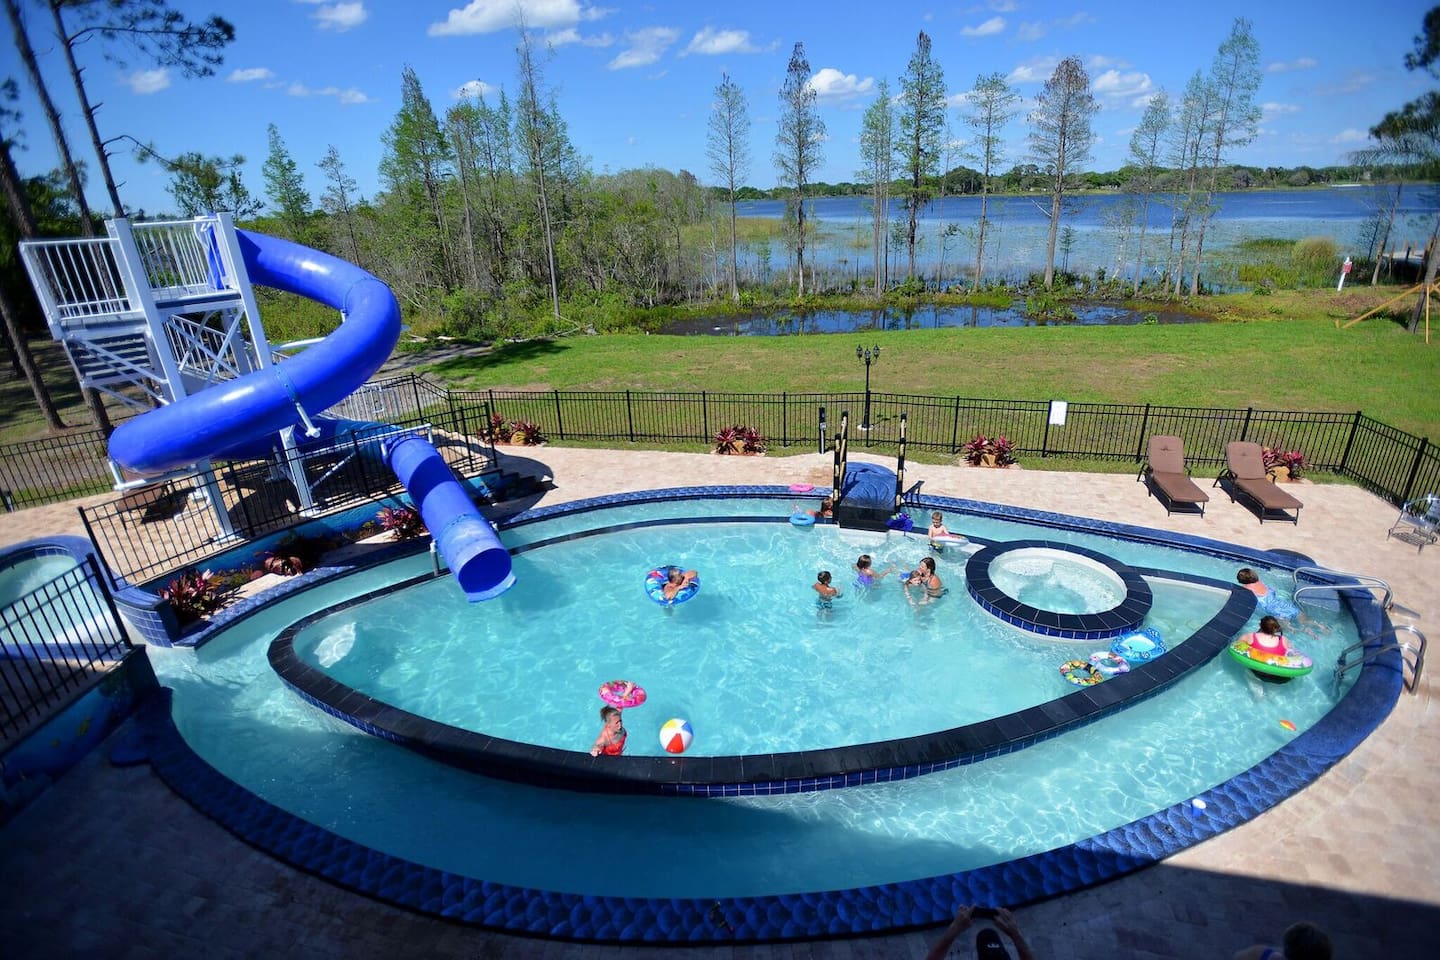 The "Go Fish" Pool has a huge waterslide, PLUS a kiddy waterslide, spa, and lazy river!